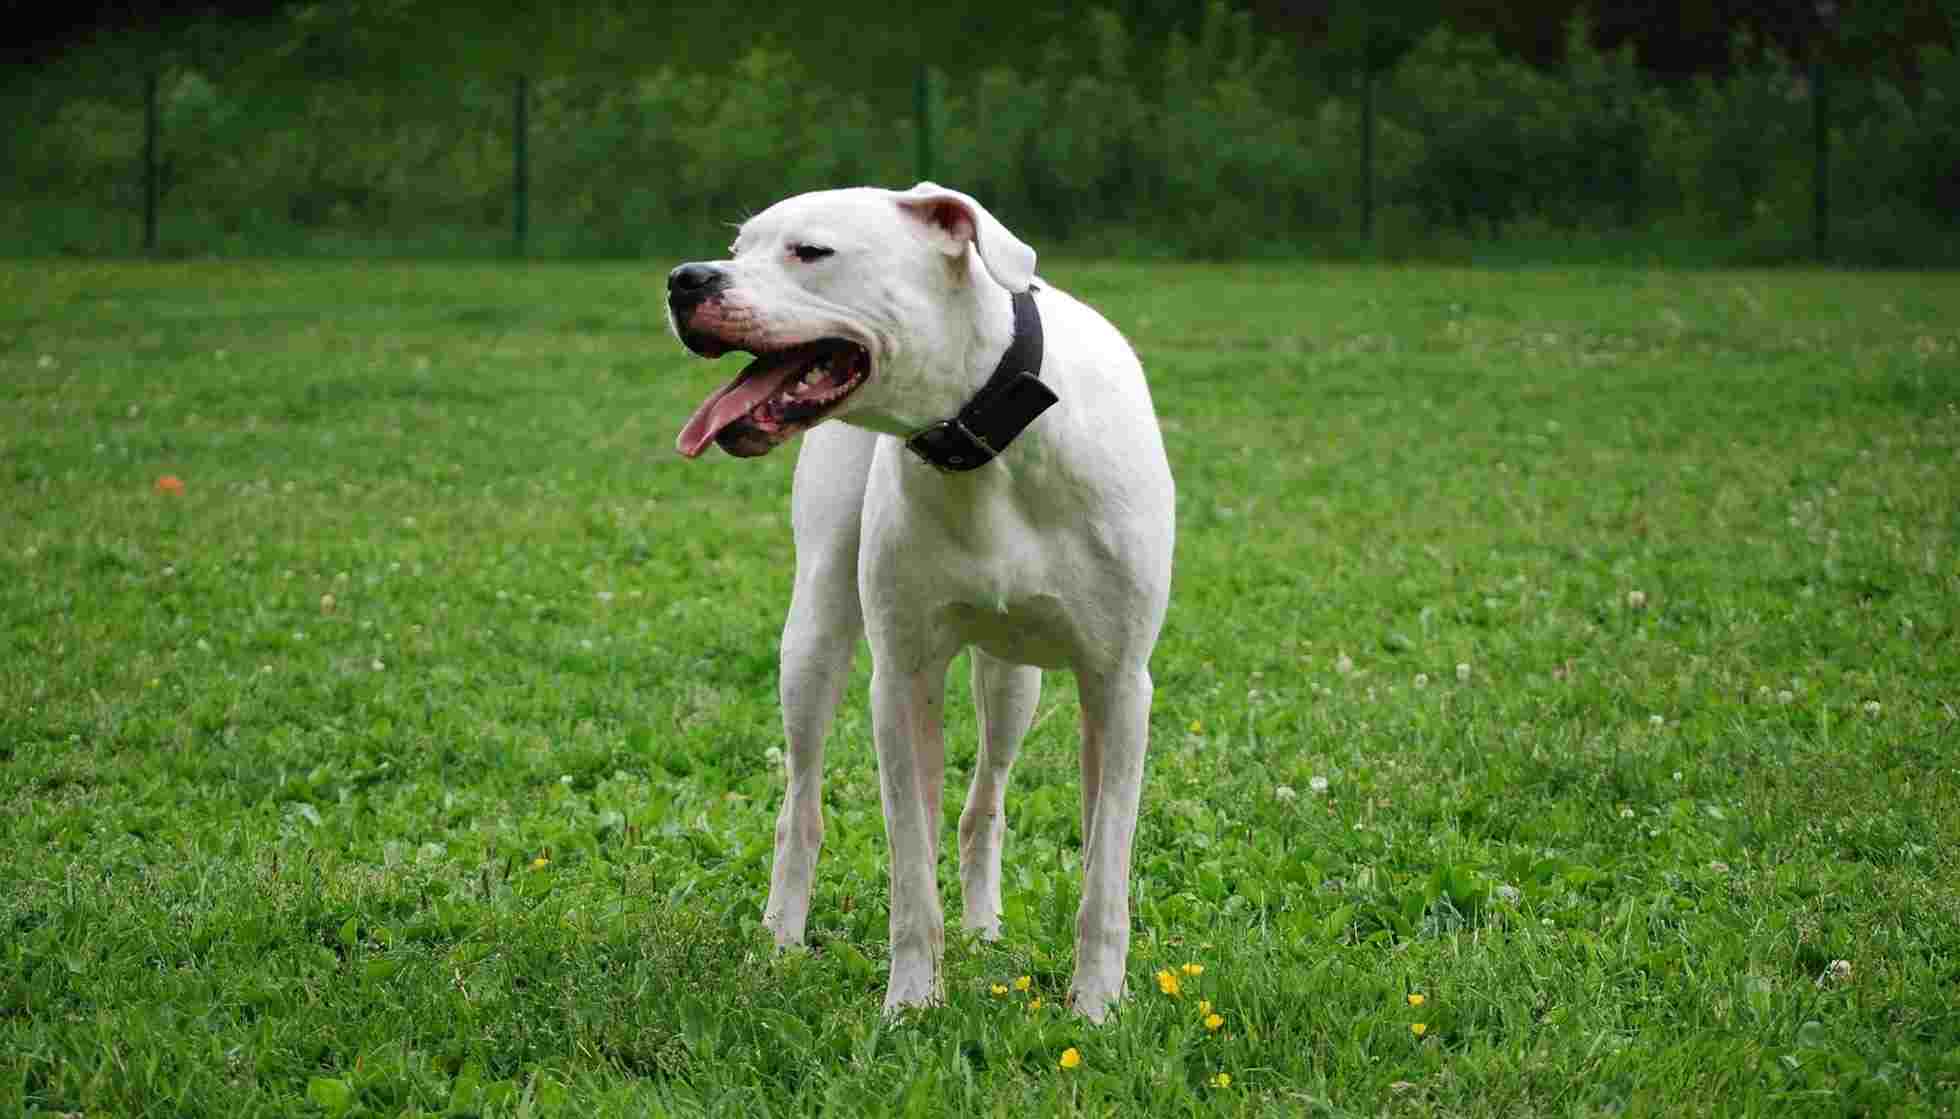 Fun Dogo Argentino Facts For Kids | Kidadl